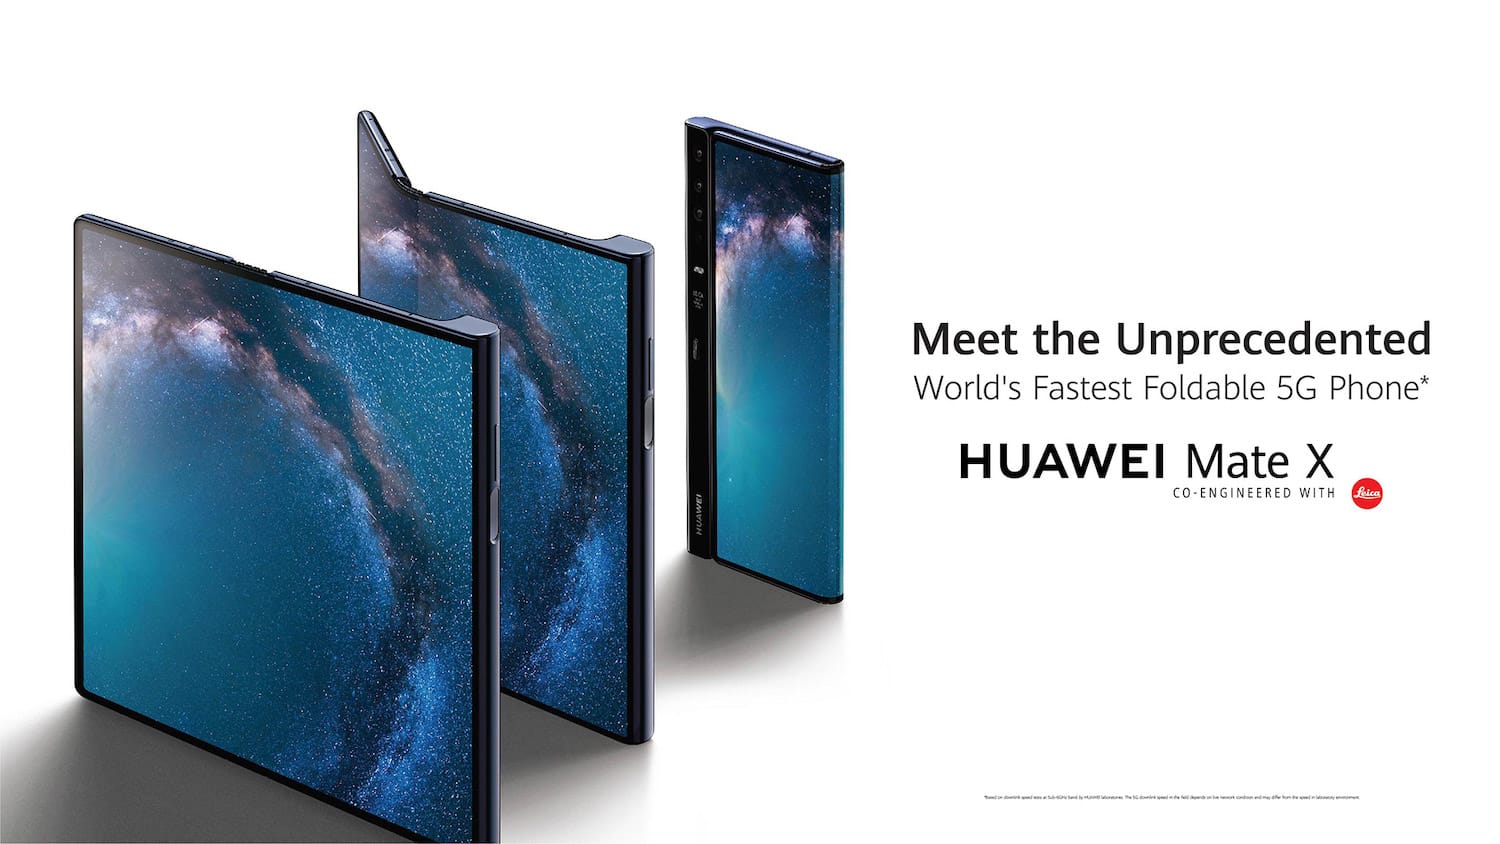 Huawei is Challenging Samsung with its Foldable Phone, Huawei Mate X